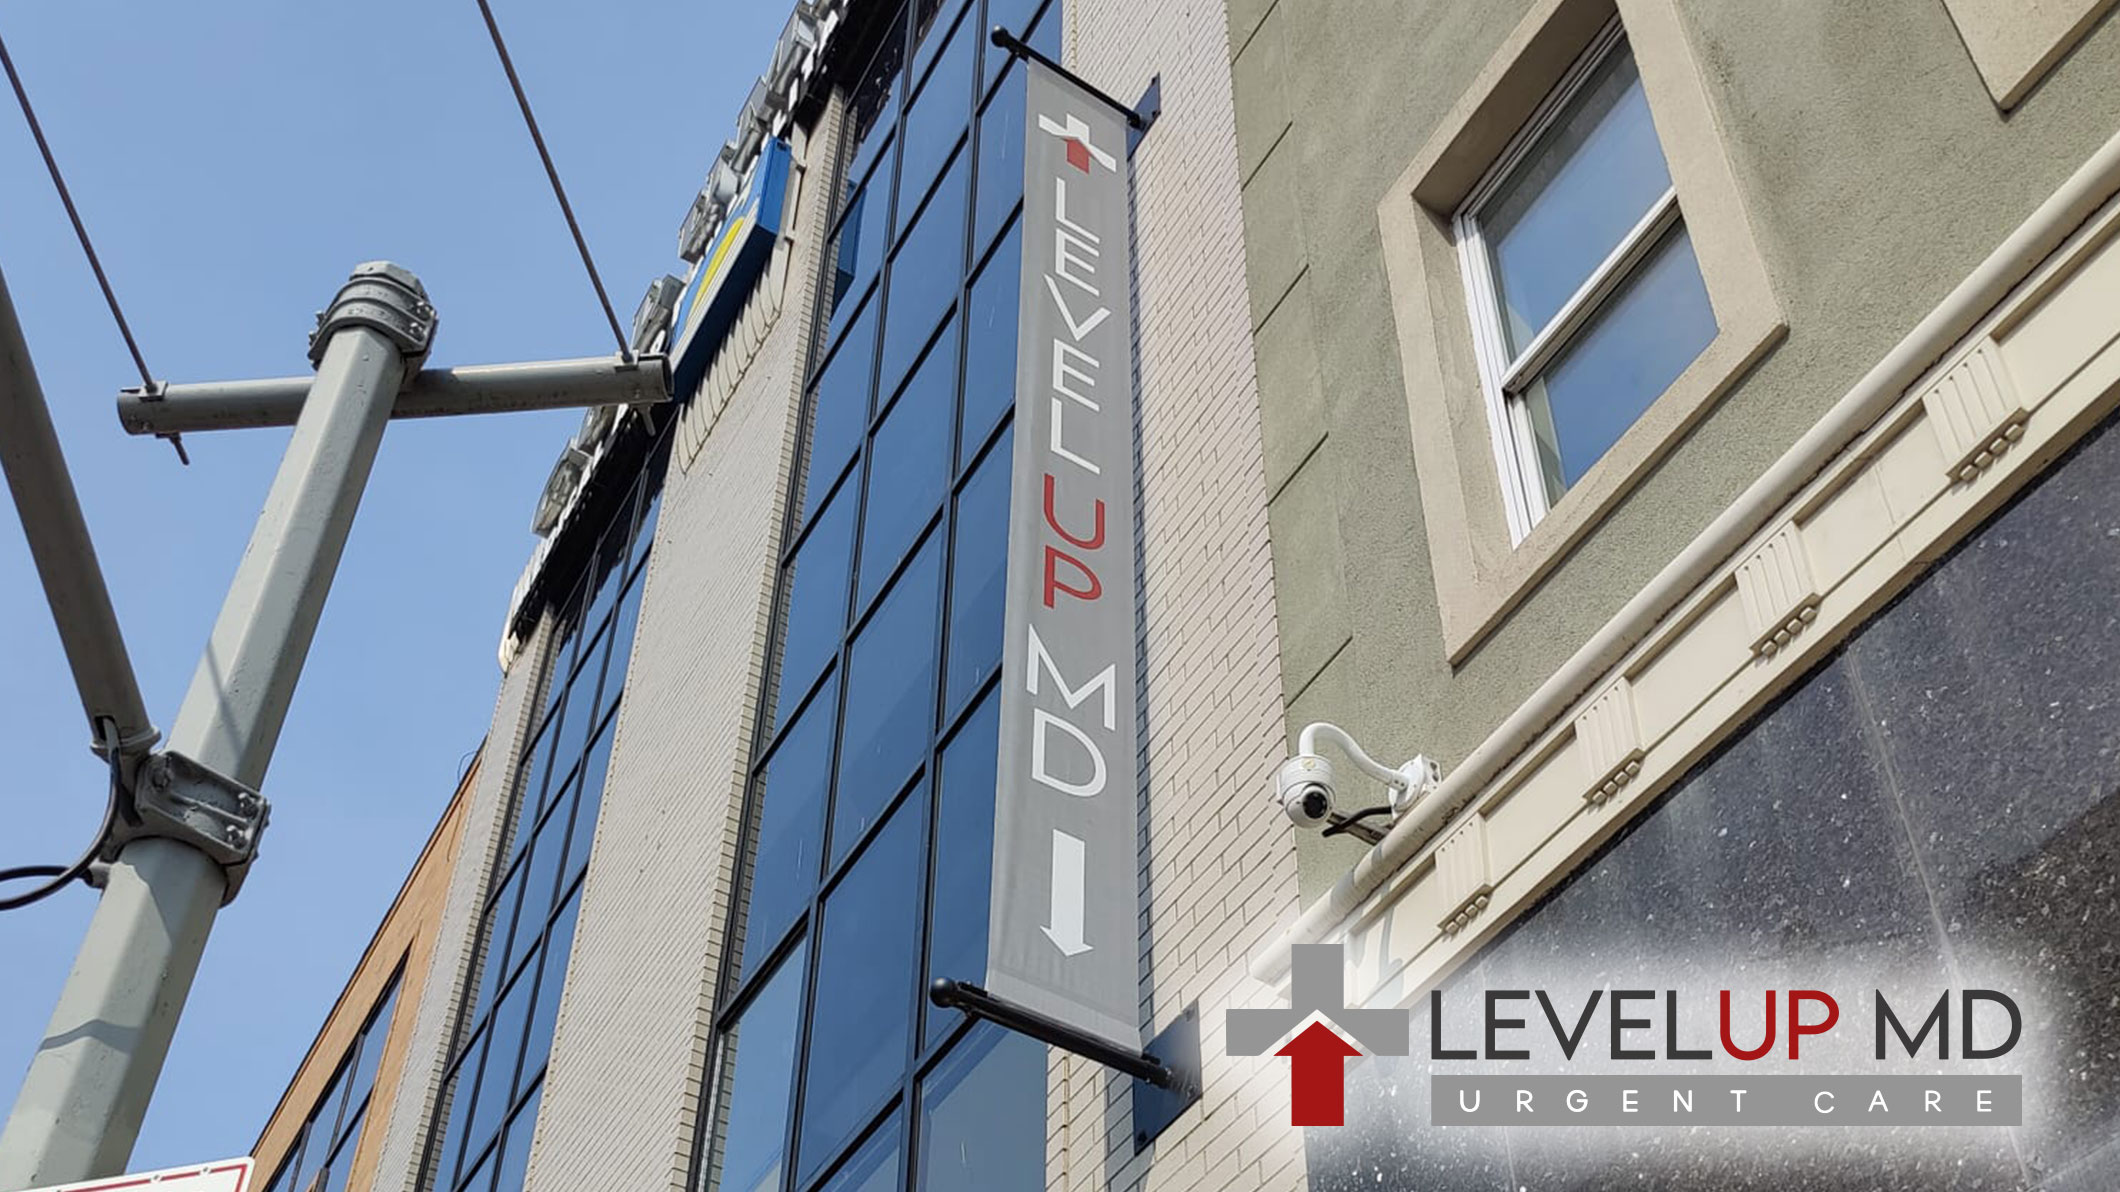 LevelUP MD Urgent Care Voorhies